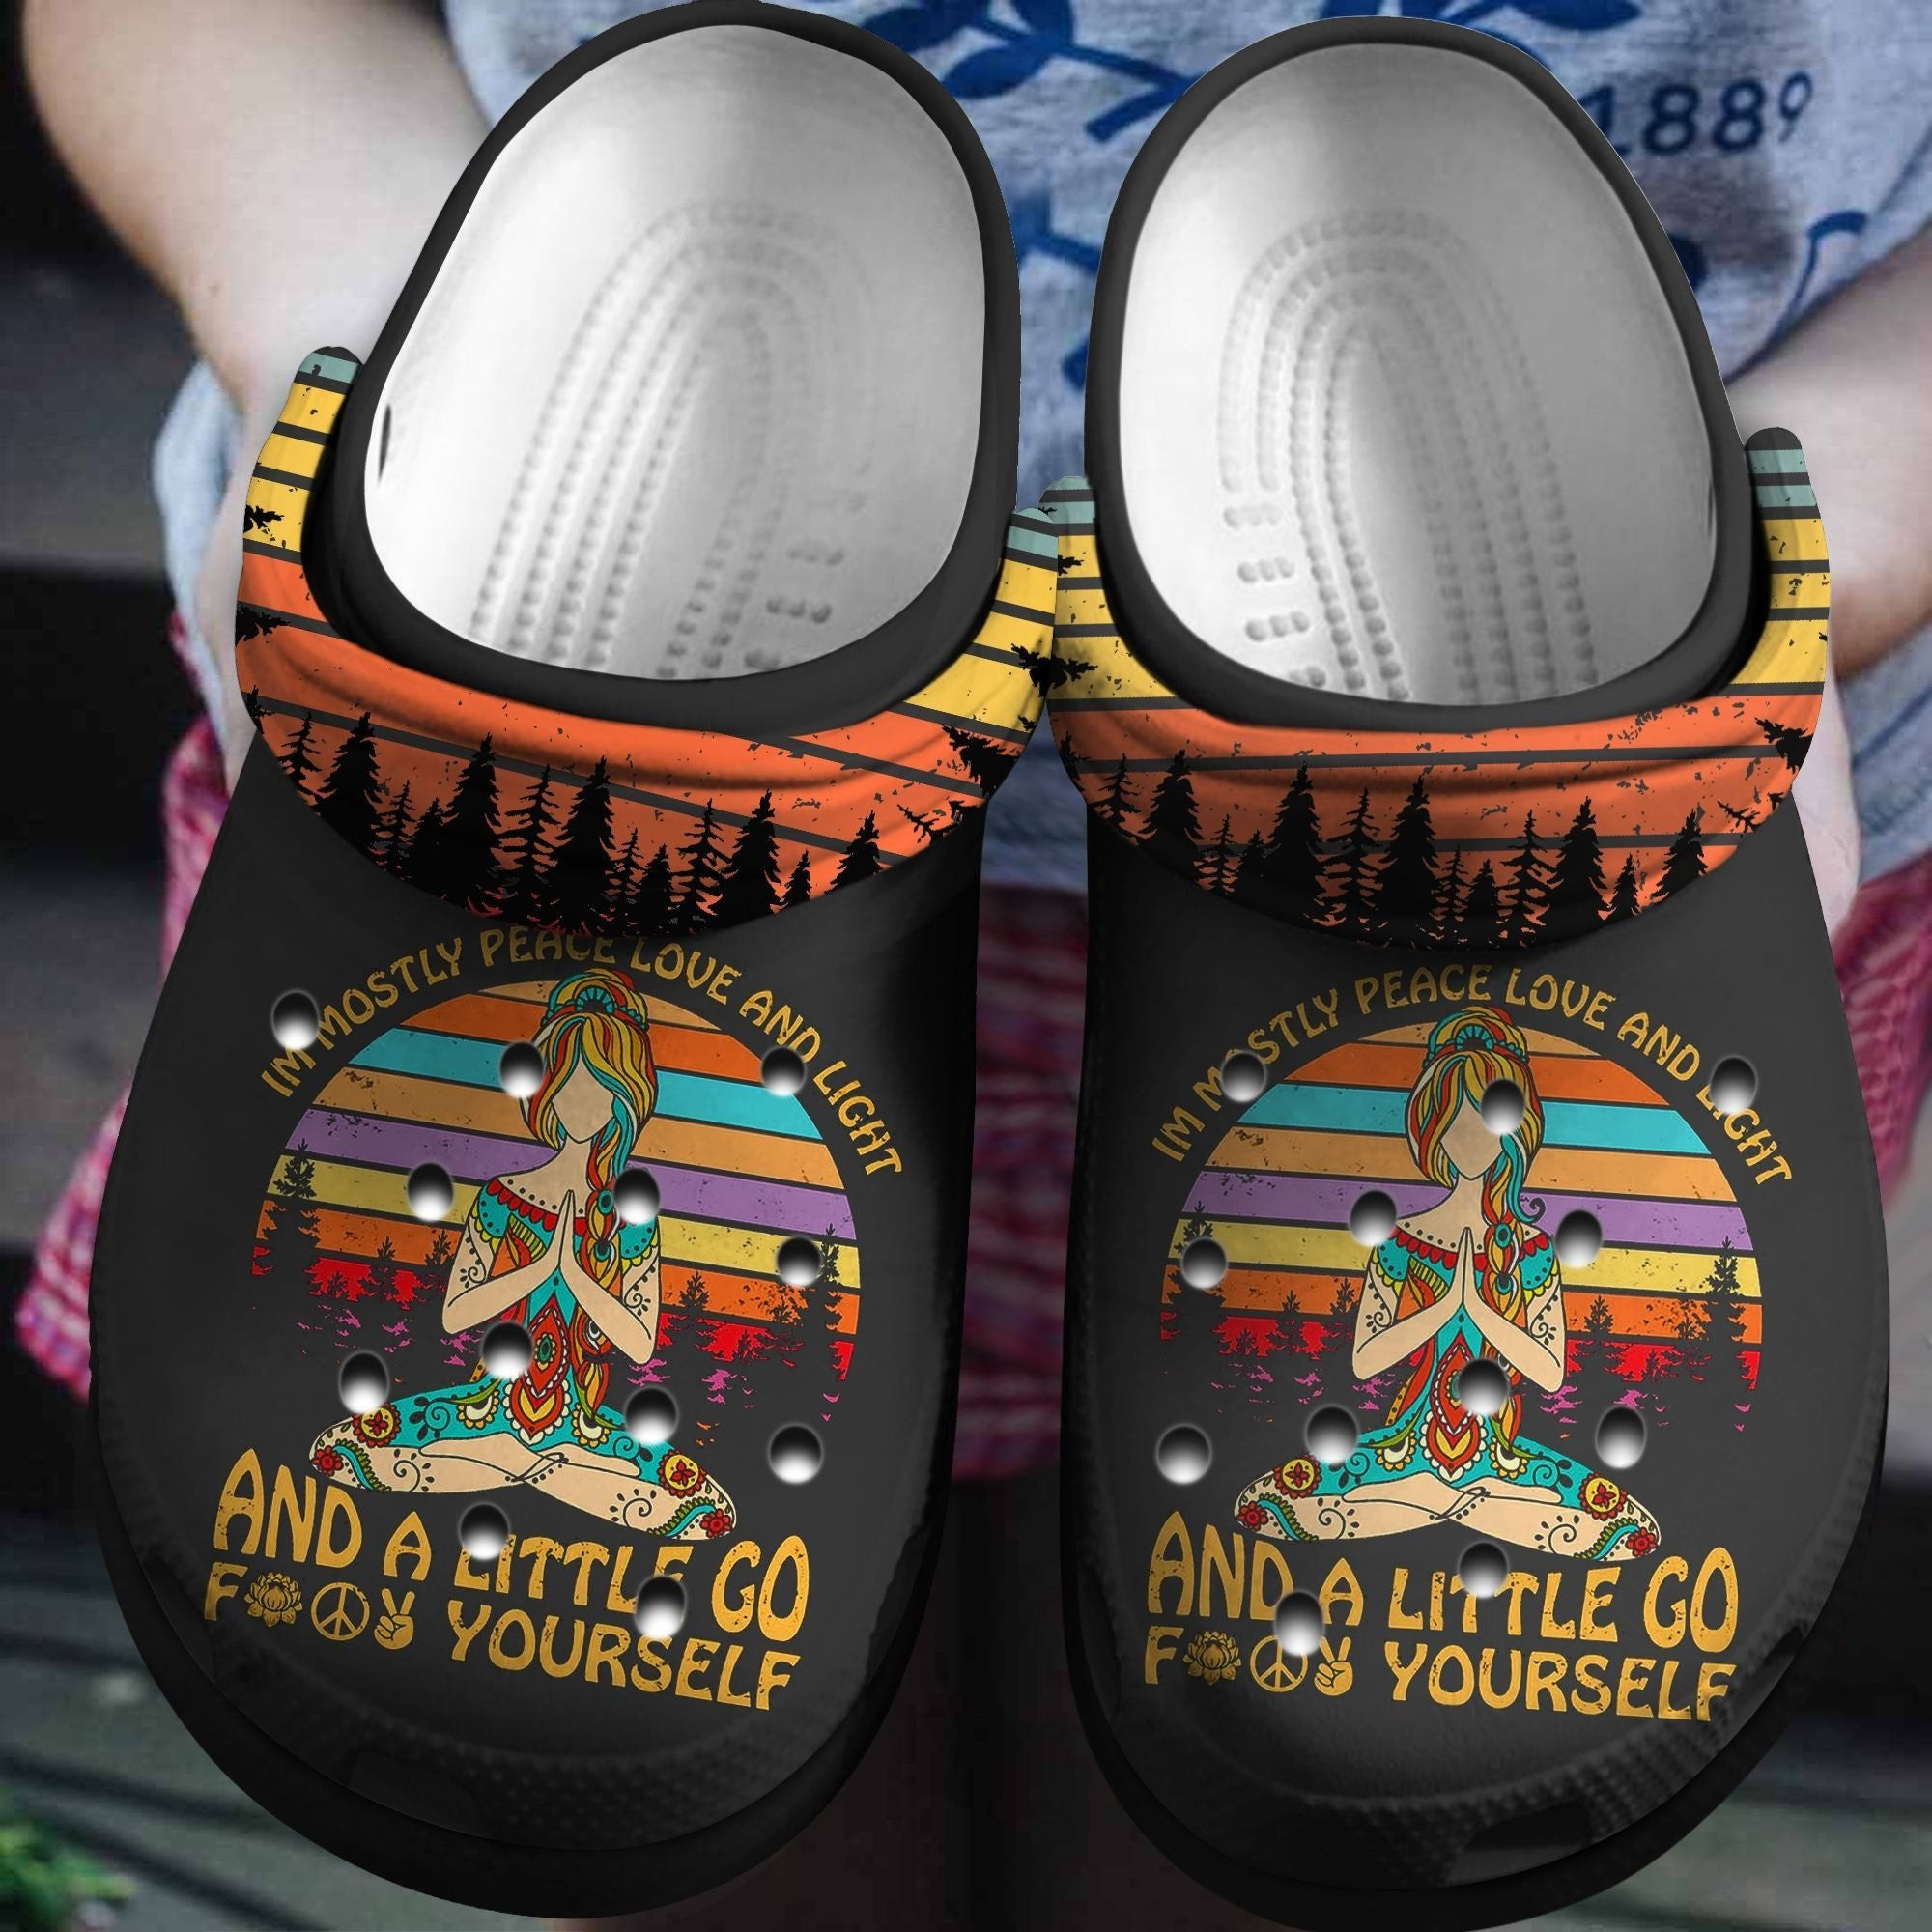 Im Mostly Peace Love And Light Shoes - Yoga Girl Crocs Clogs Gift For Birthday